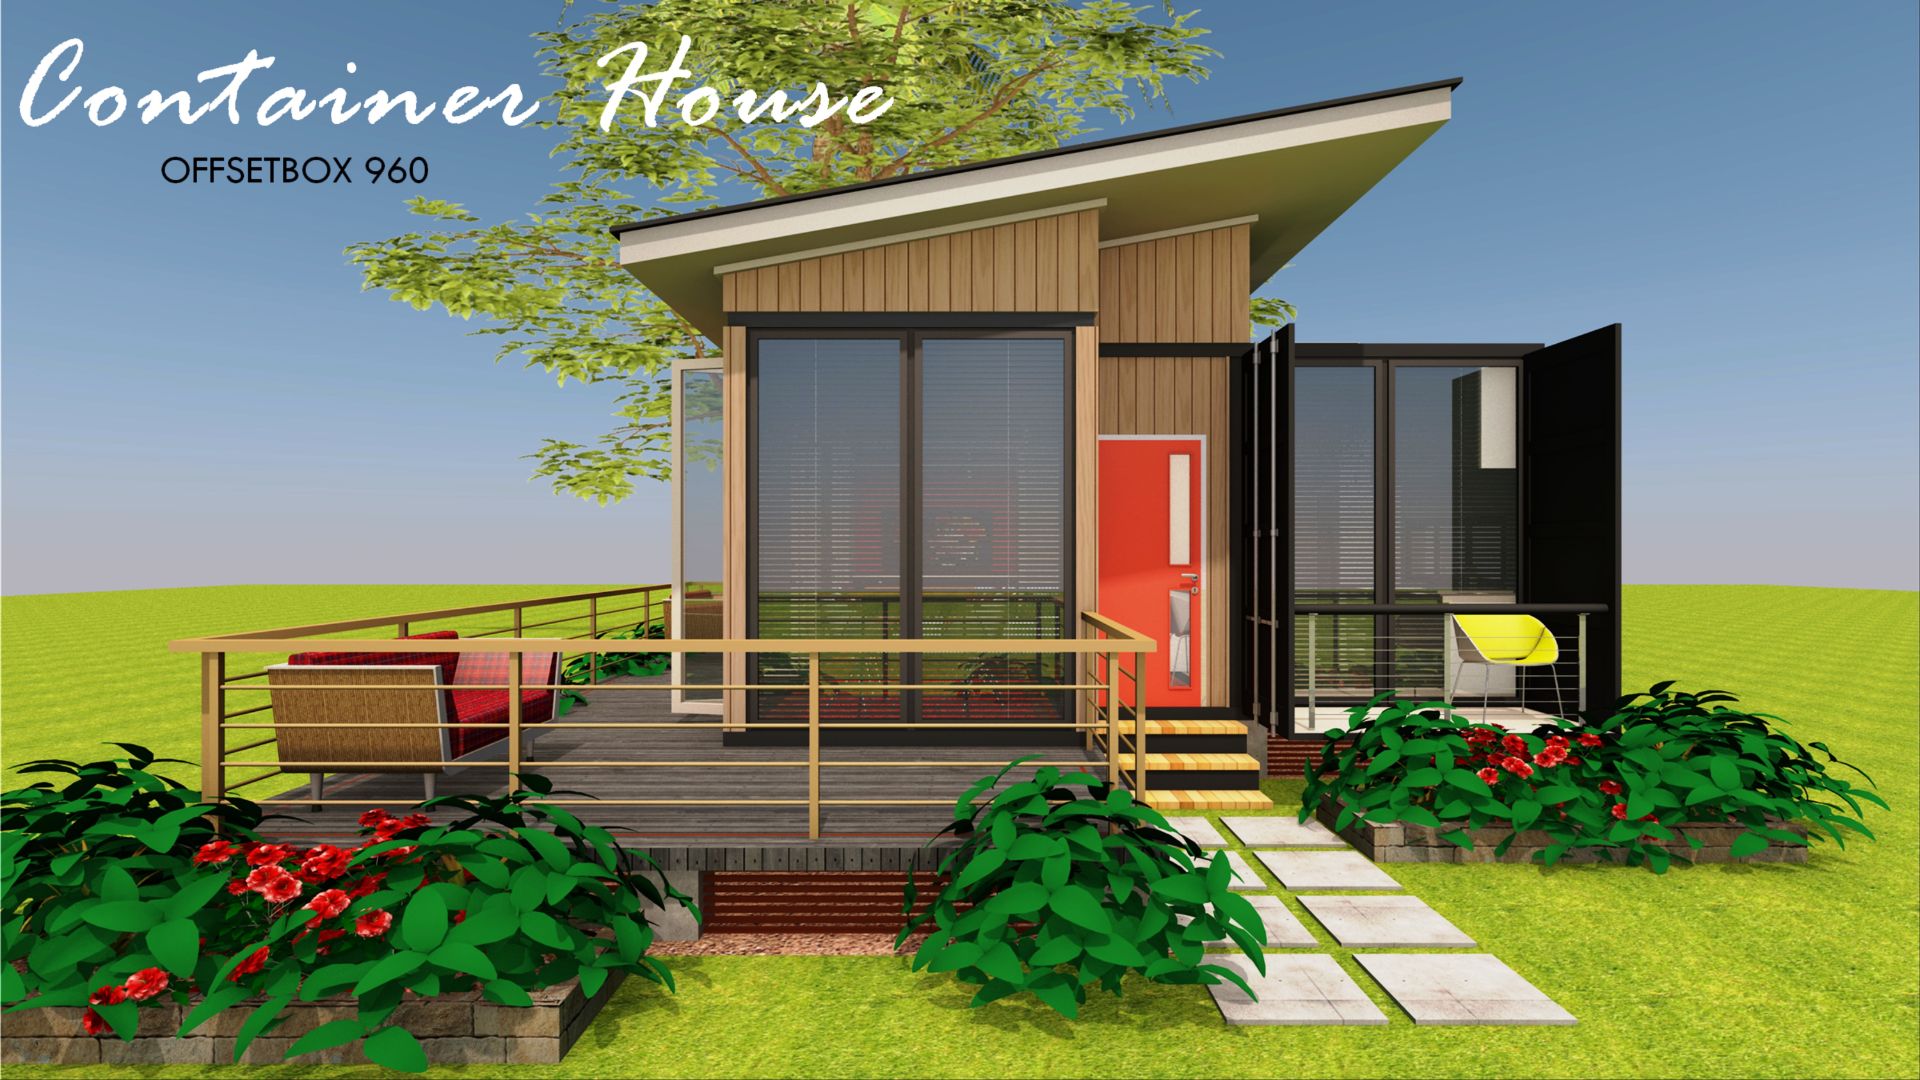 Shipping Container 3 Bedroom Bungalow House Design | OFFSETBOX 640